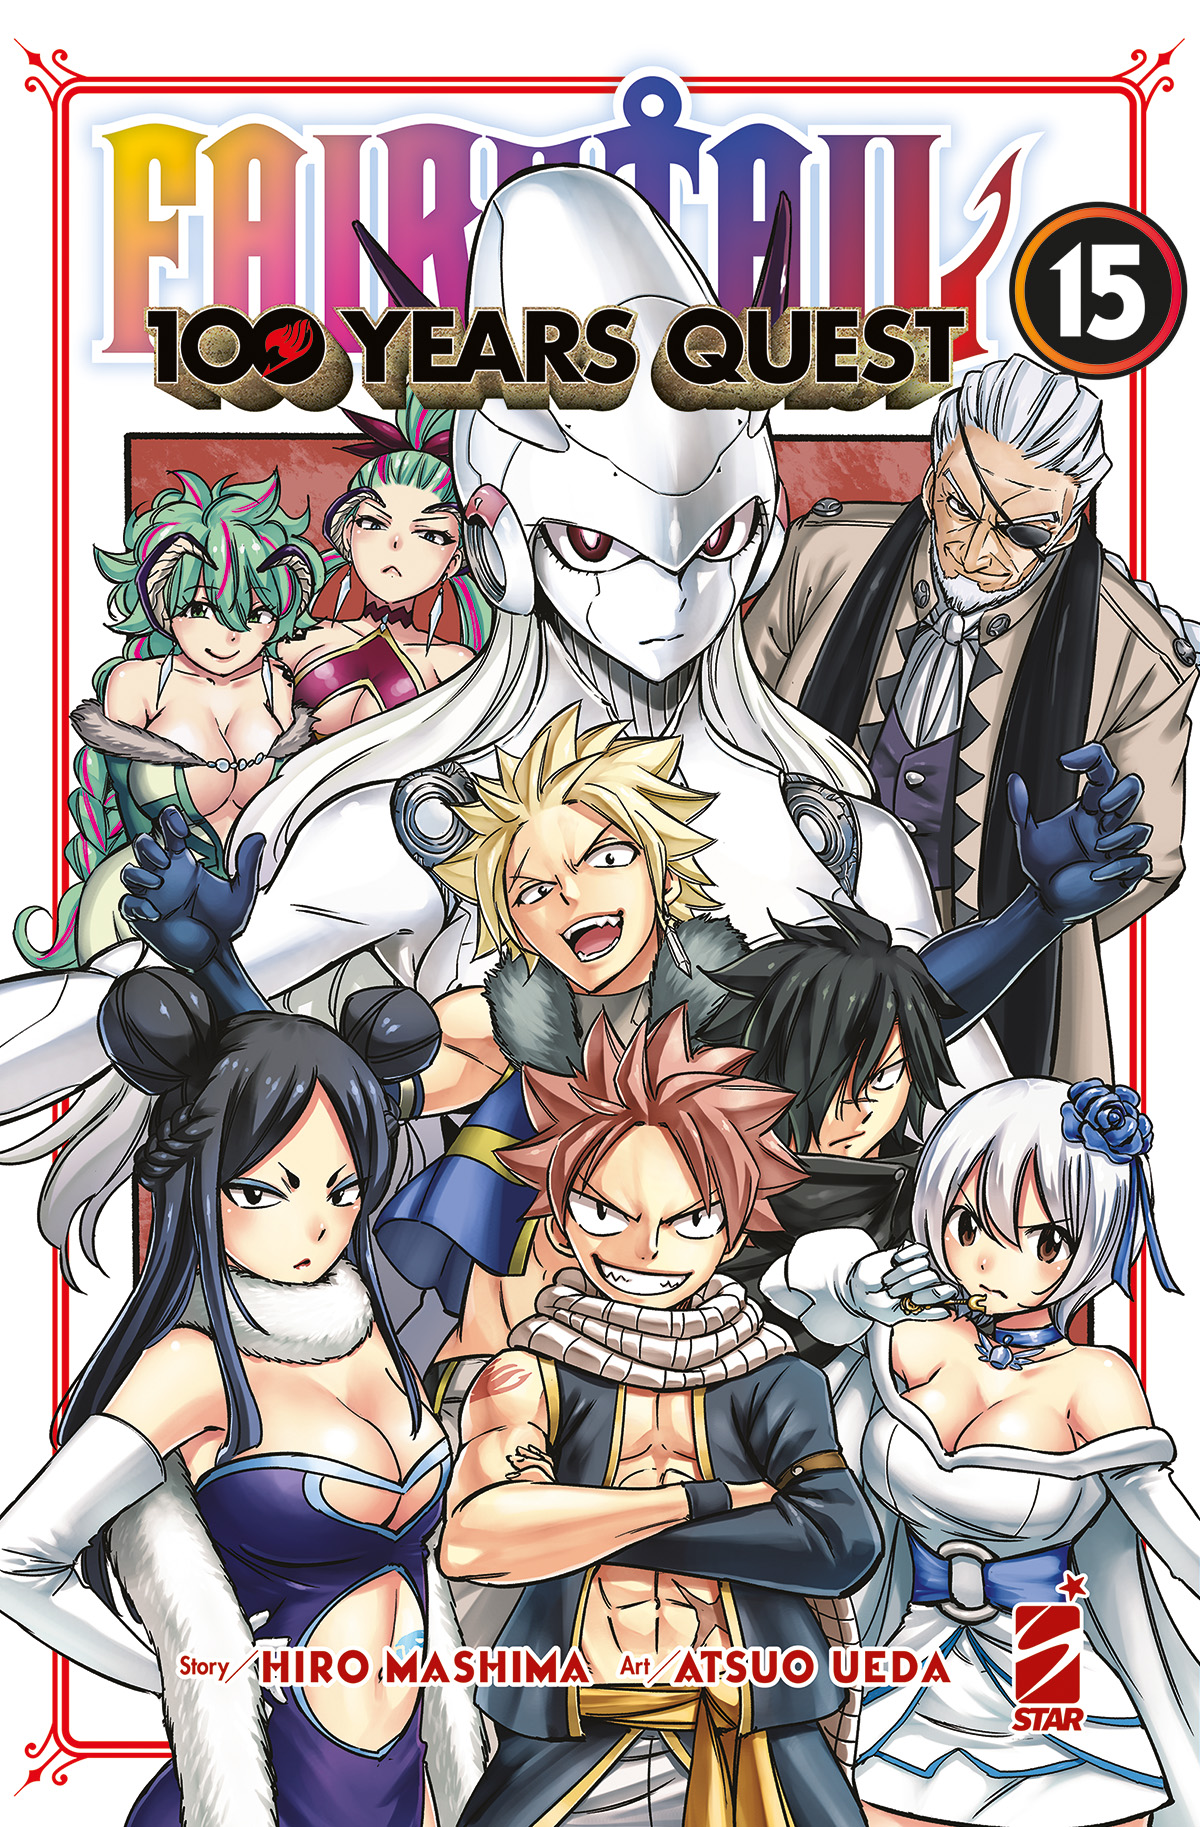 YOUNG #353 FAIRY TAIL 100 YEARS QUEST N.15